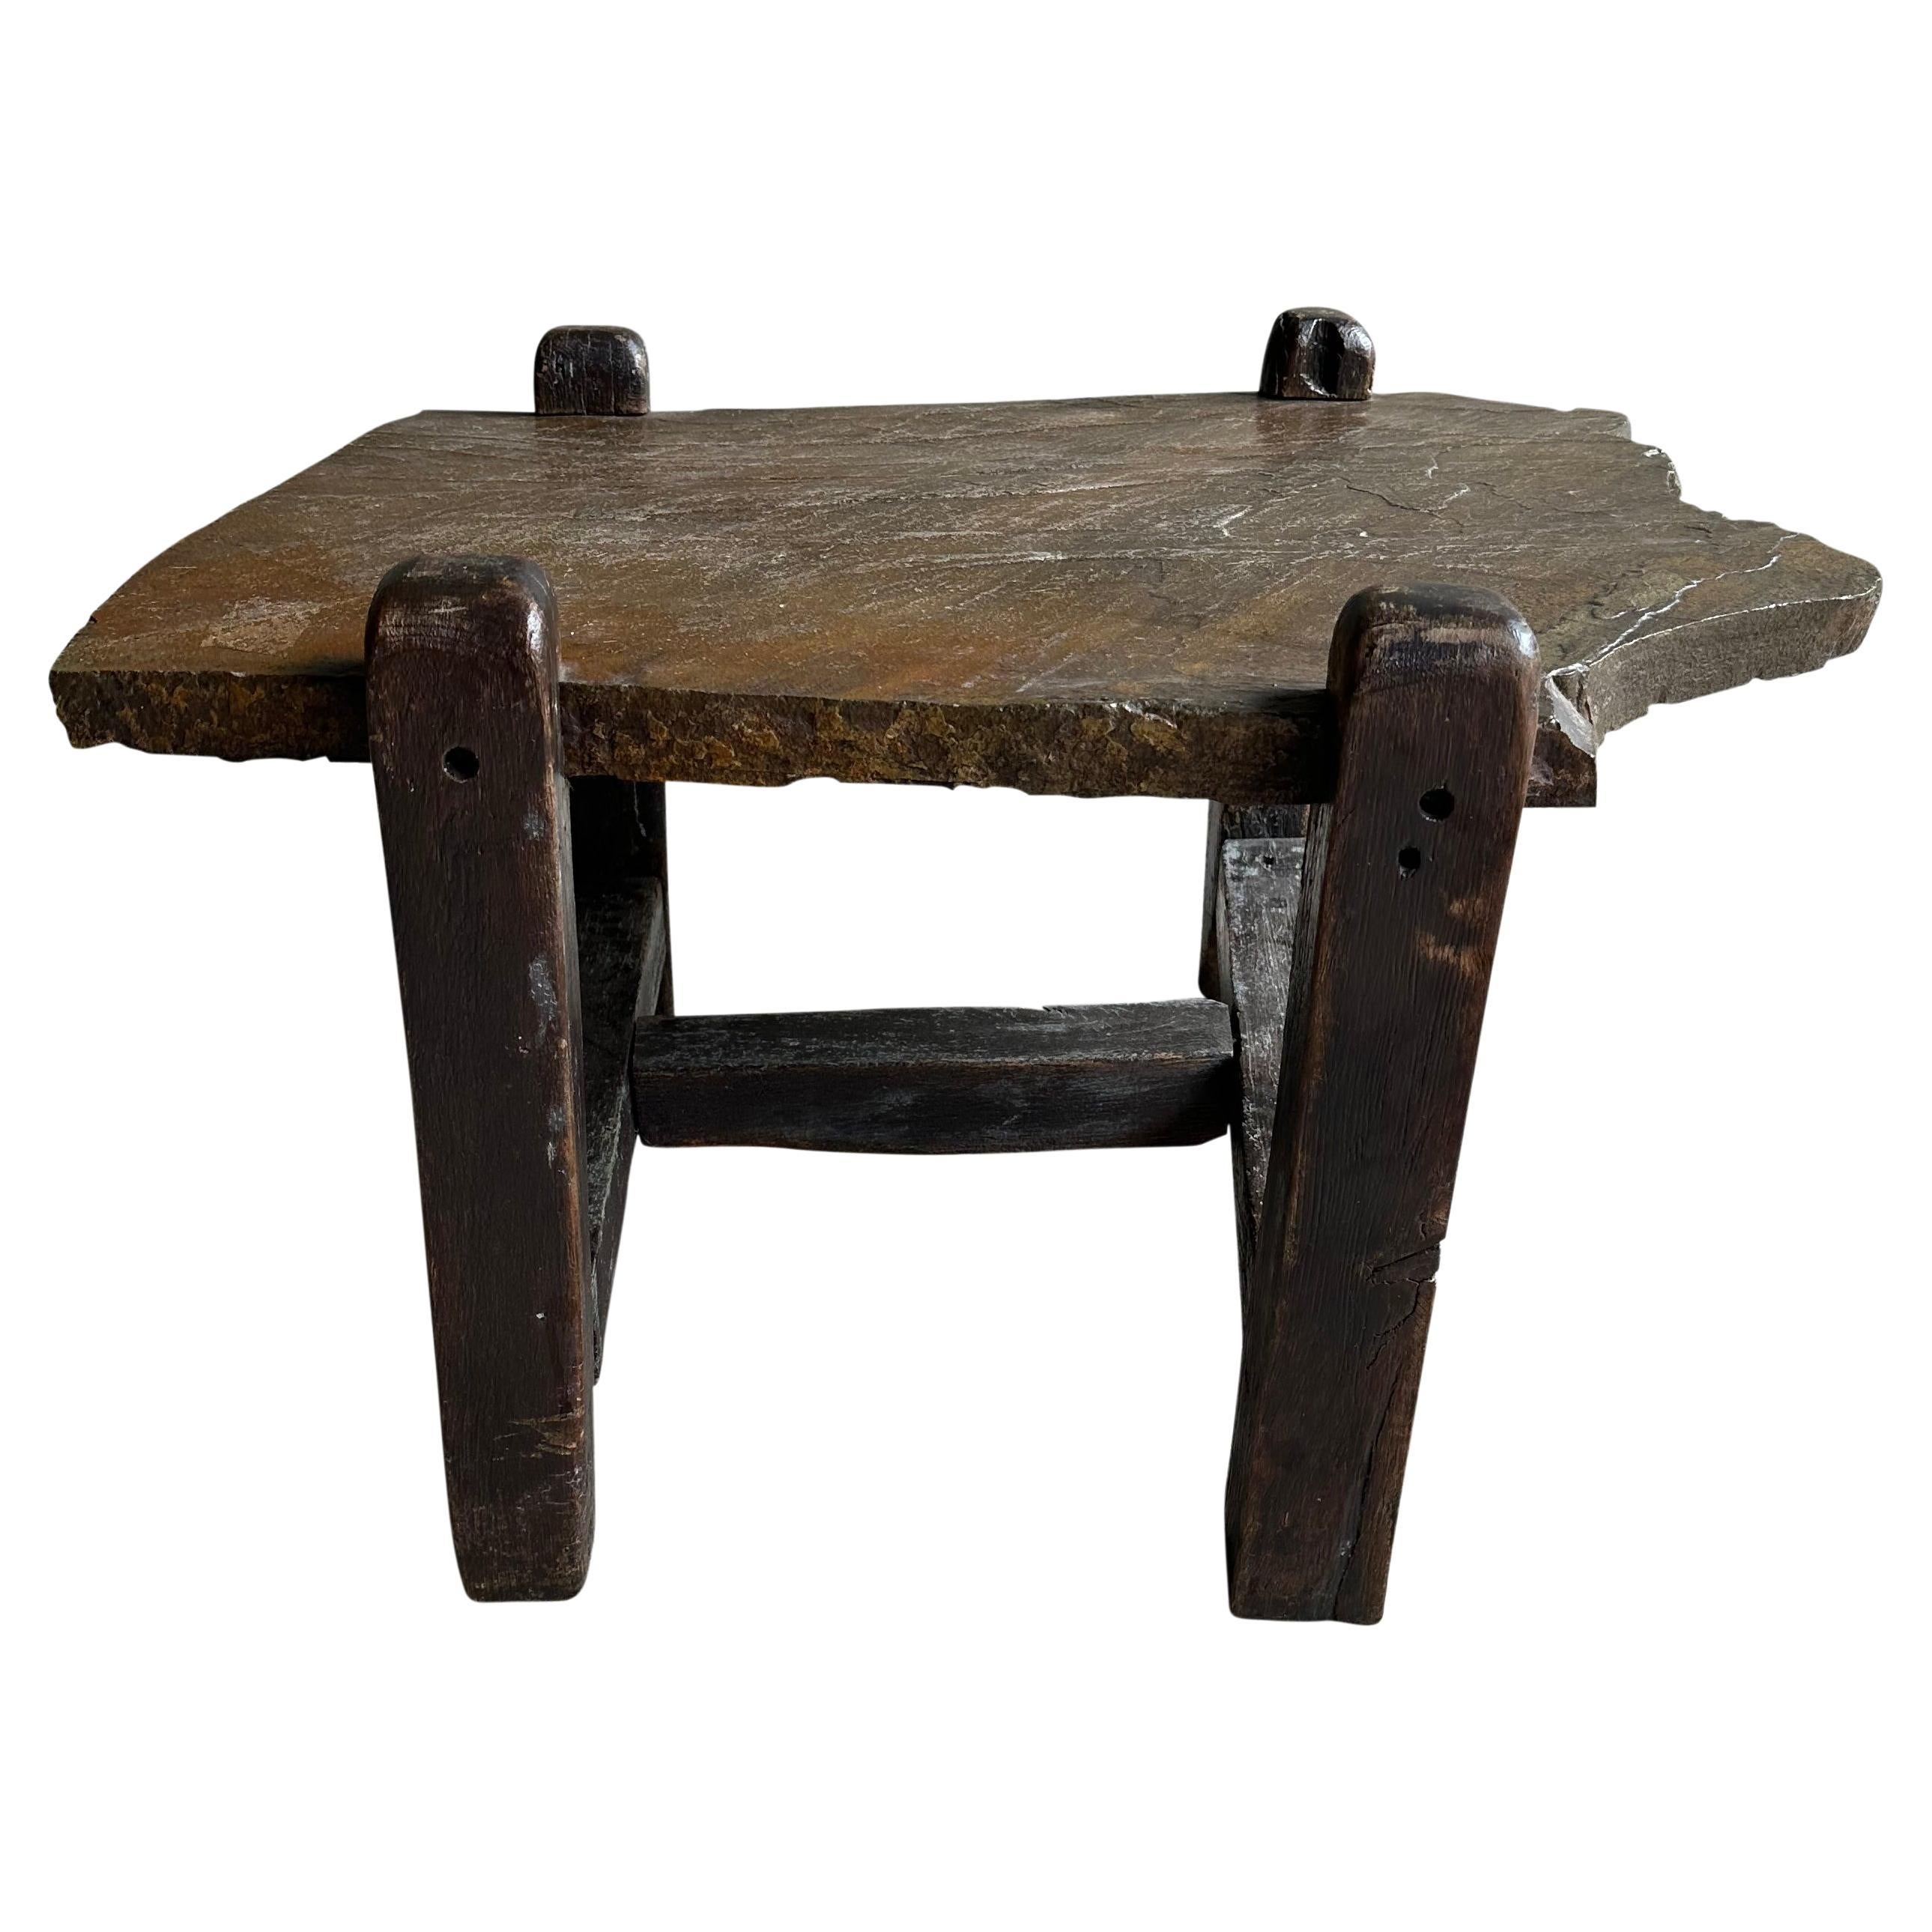 Brutalist Rustic Stone Table, France, 1940s For Sale